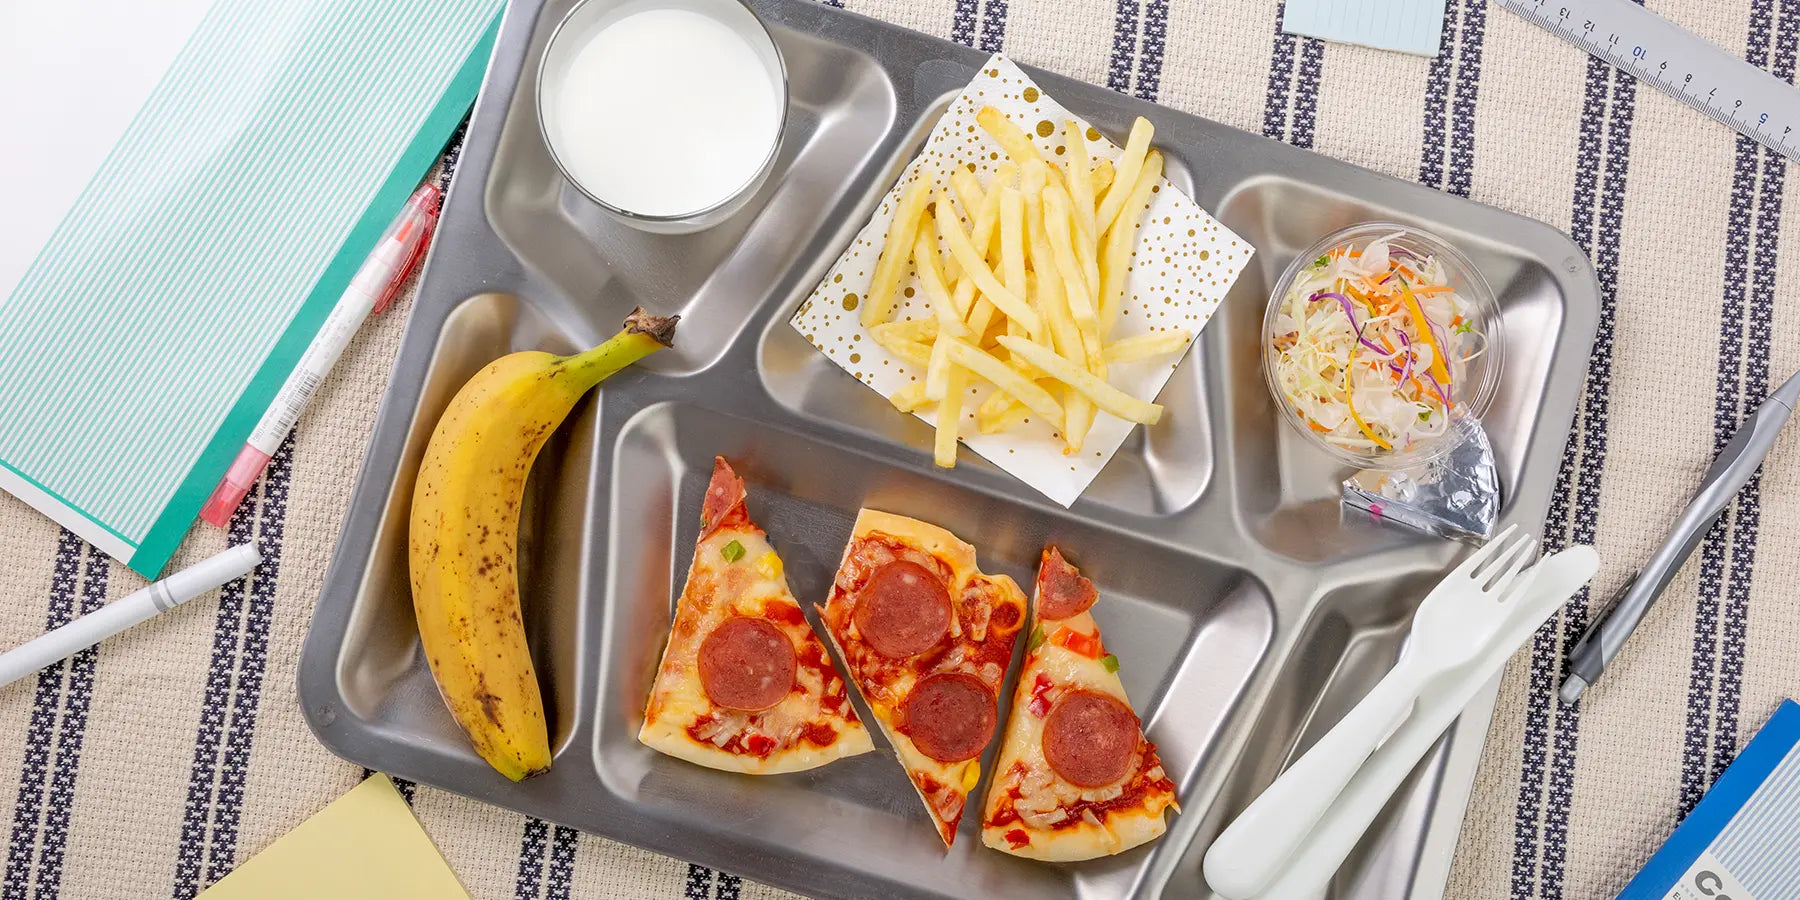 Discover our great selection of School Lunch Plates & Trays  on Globalkitchen Japan.